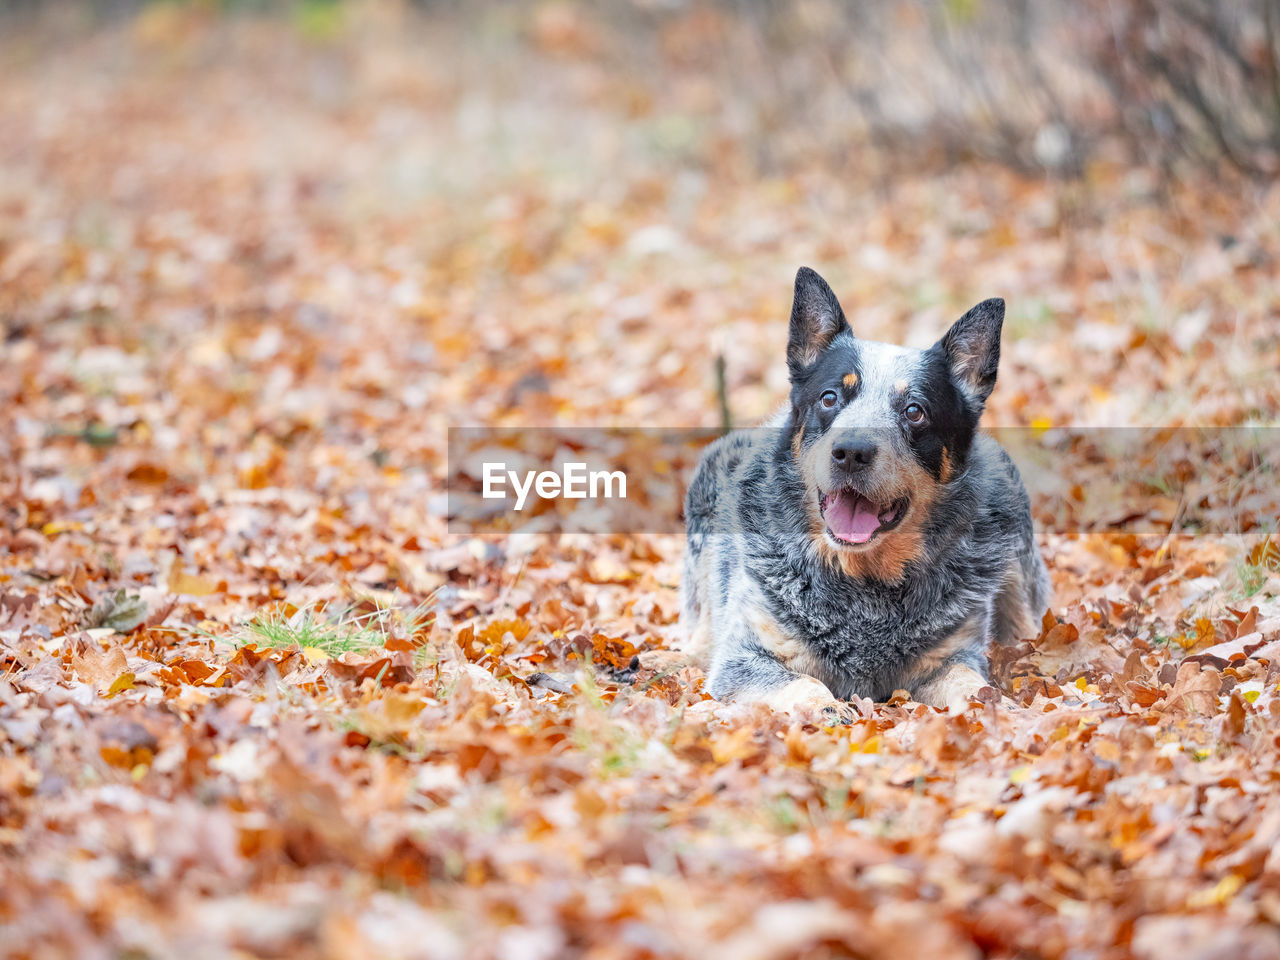 Young blue heeler dog playing with leaves in autumn. happy healthy dog.